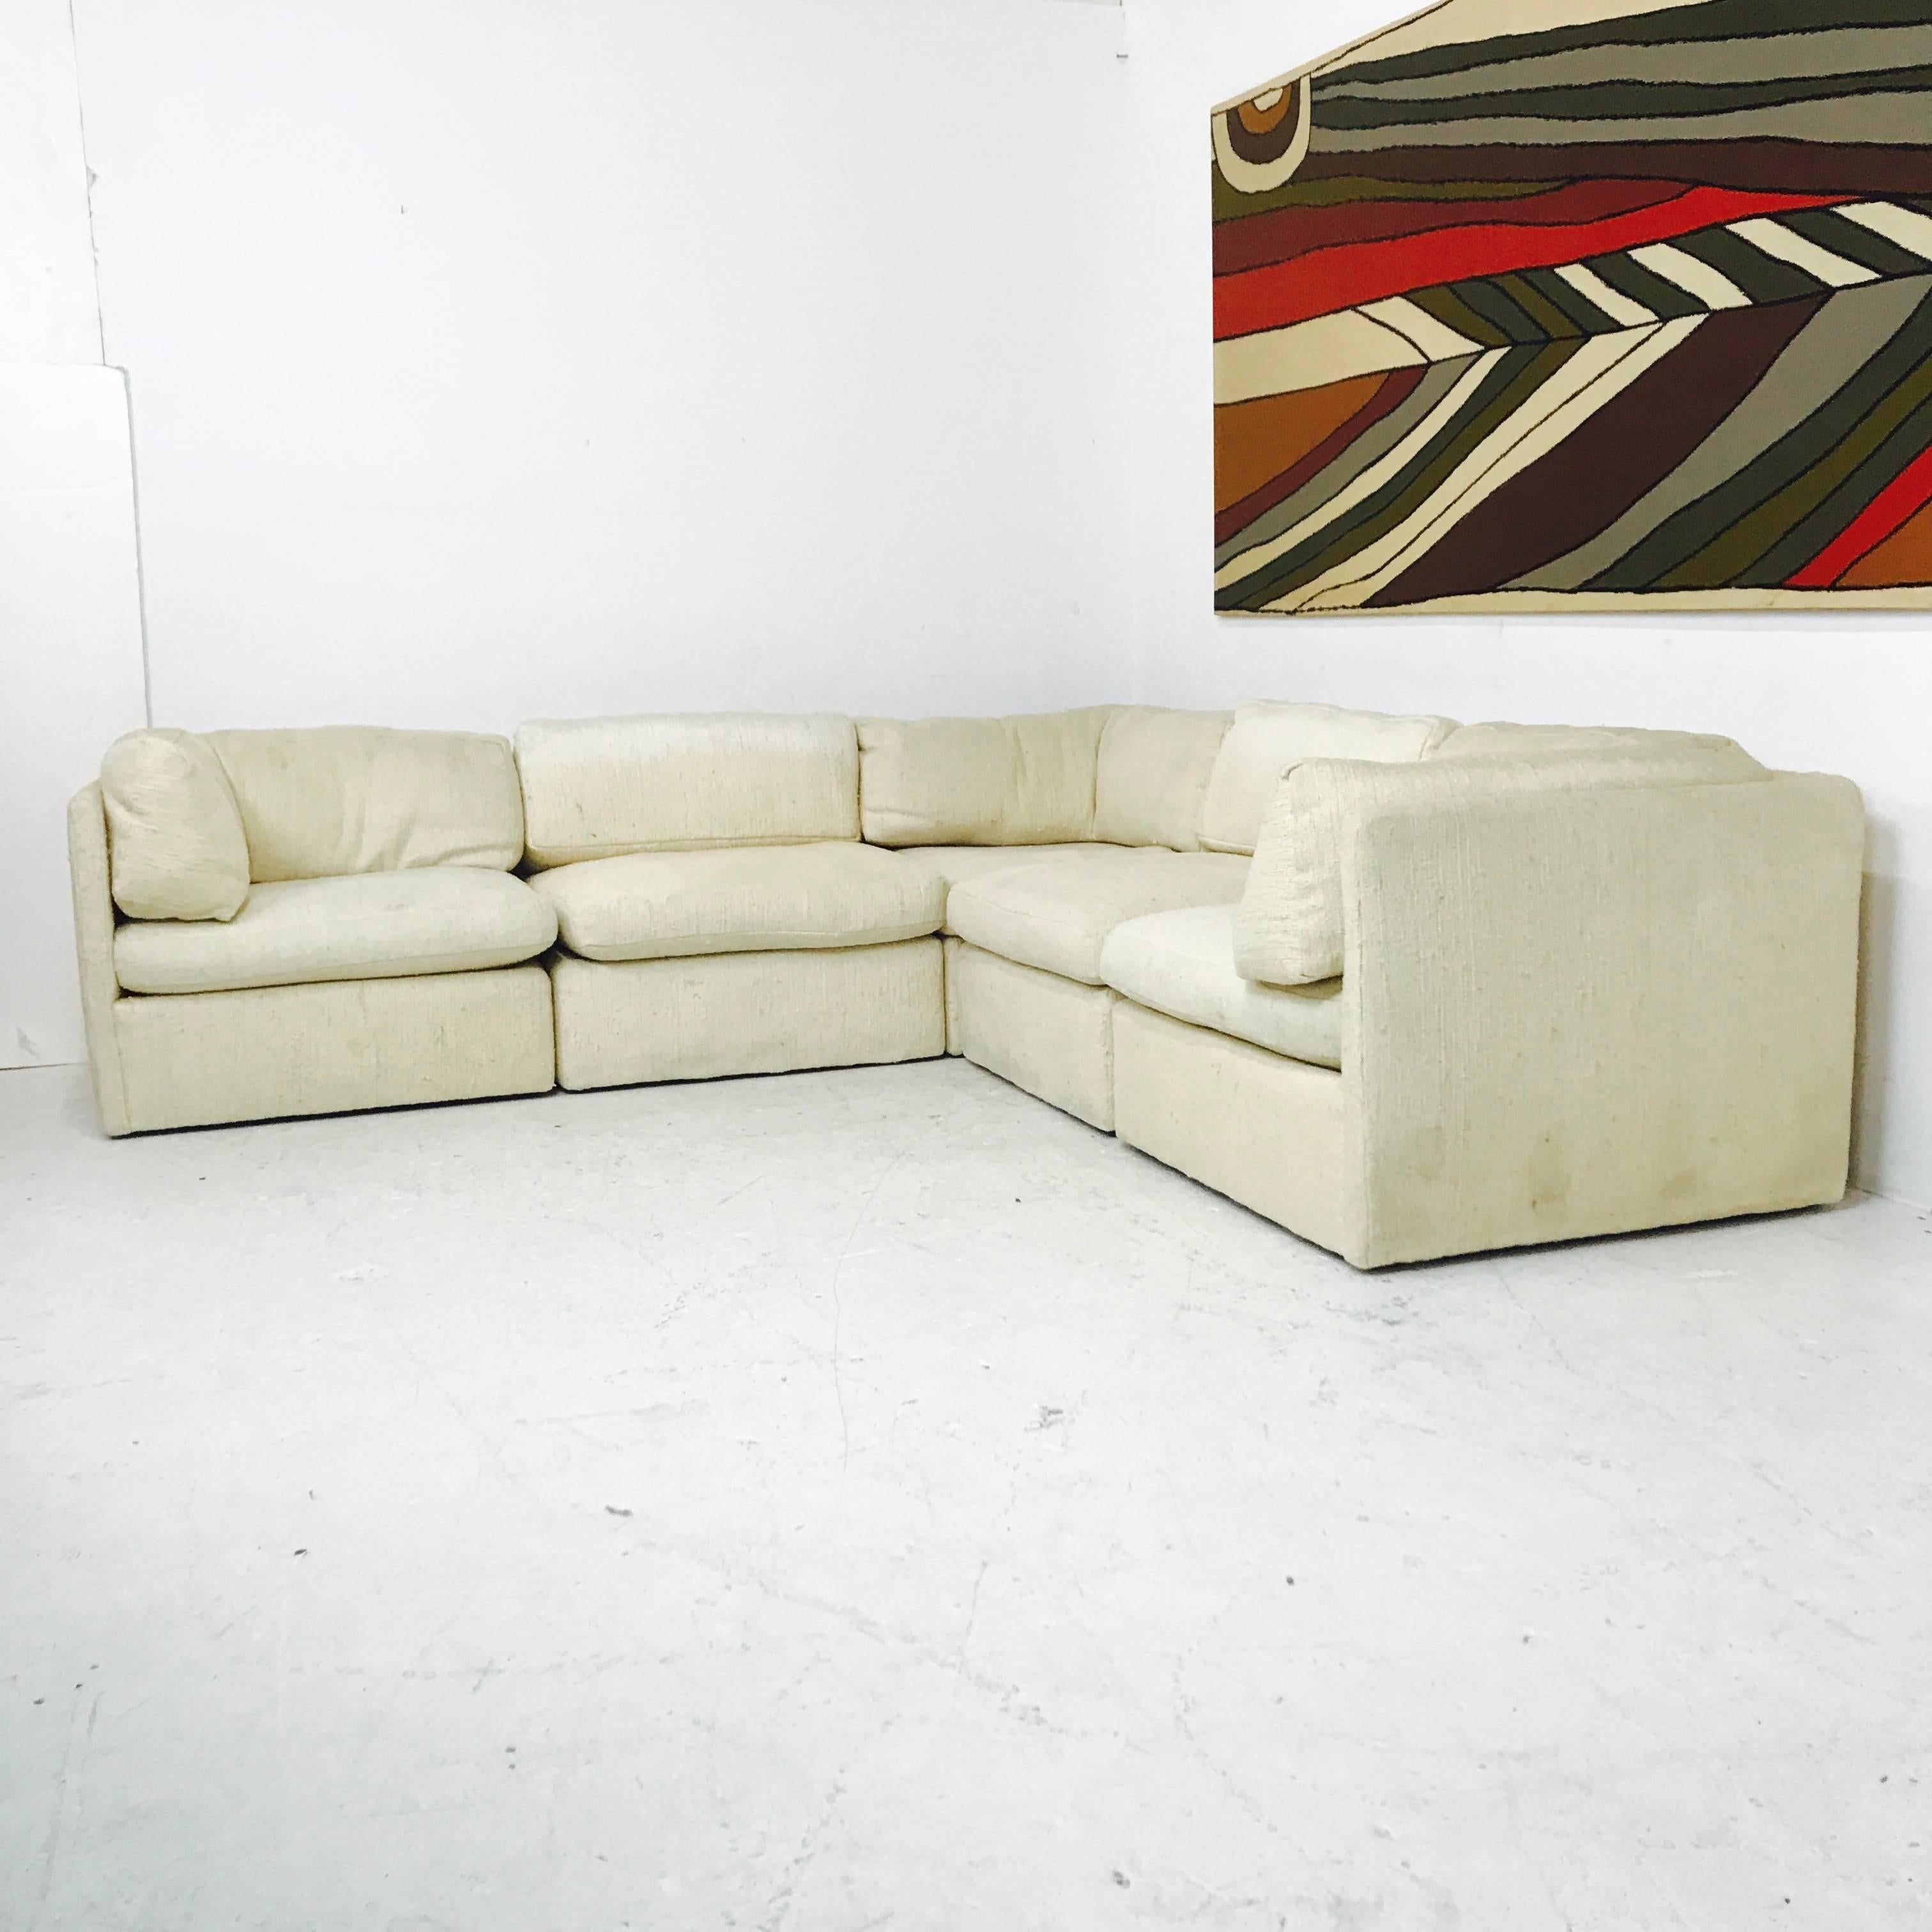 Milo Baughman modular sectional sofa for Thayer Coggin. Structure is sound but new upholstery is needed, circa 1970s

Dimensions: 100